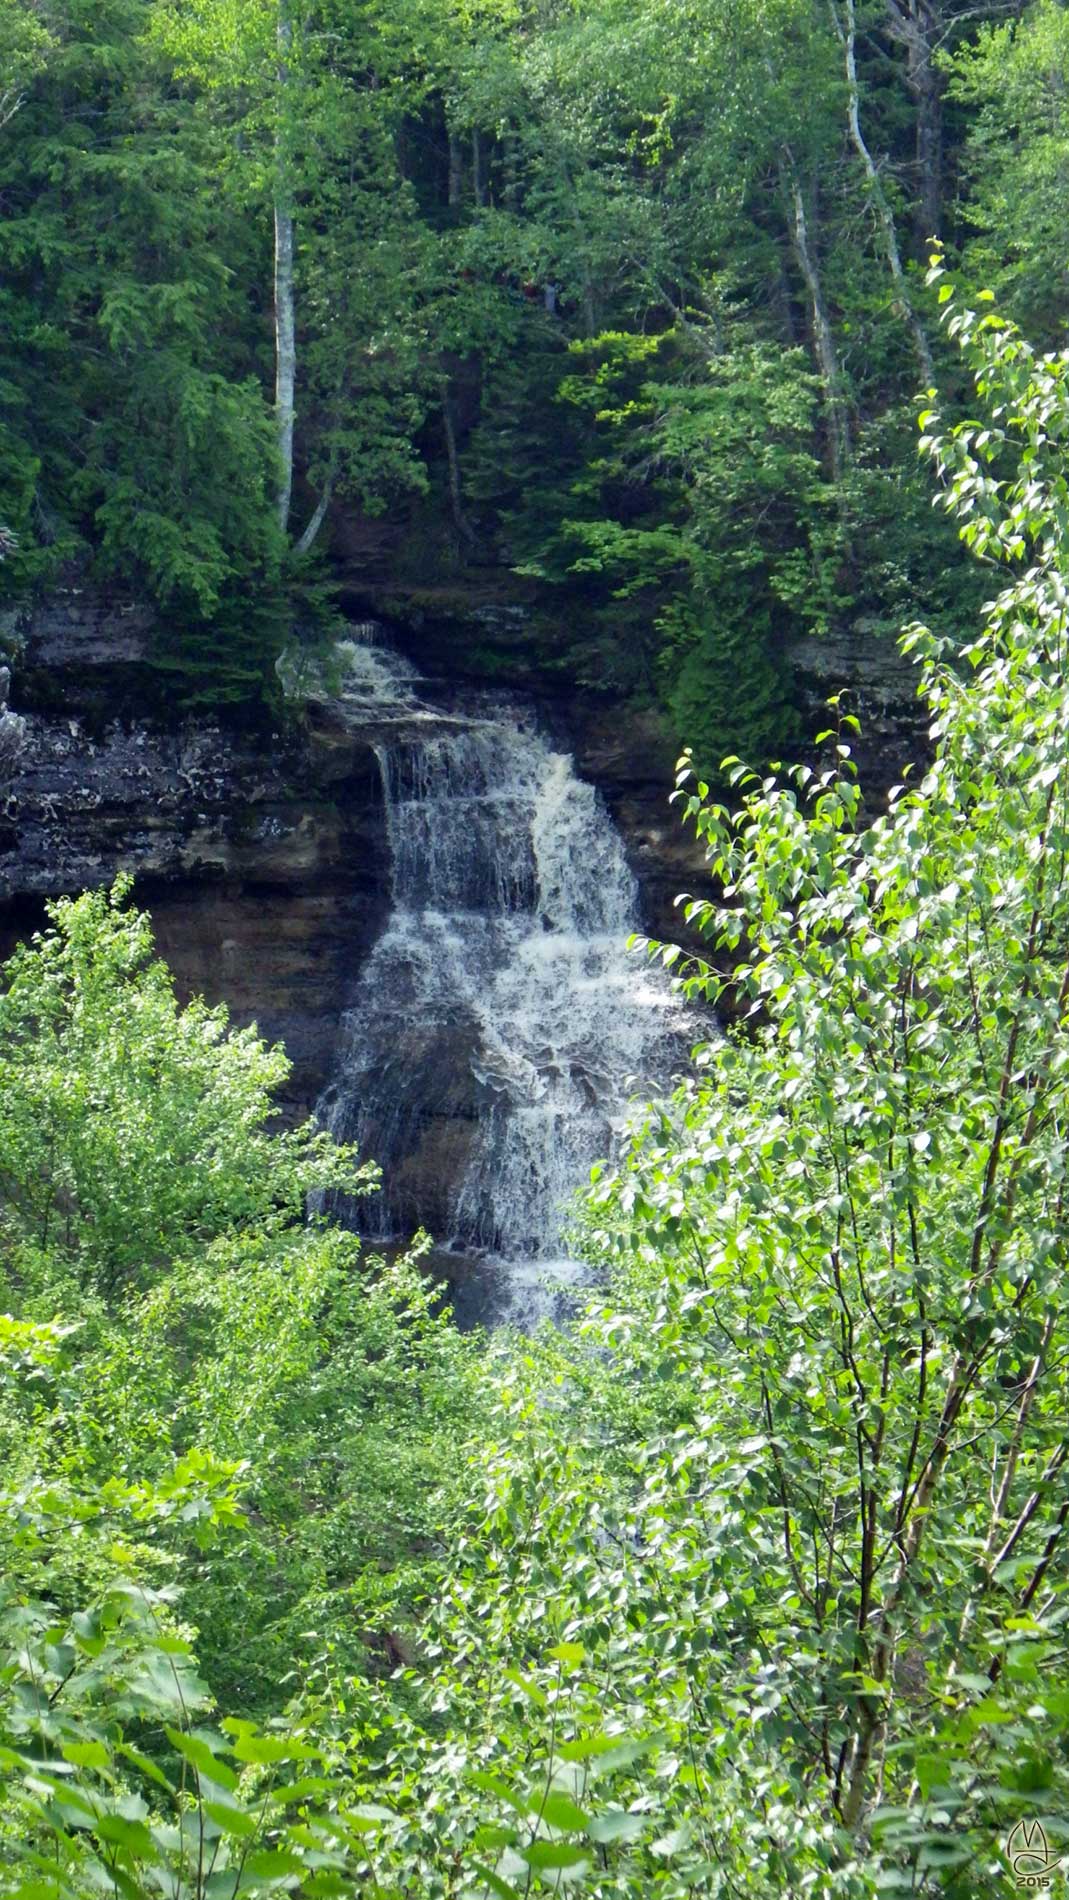 Chapel Falls from the overlook.